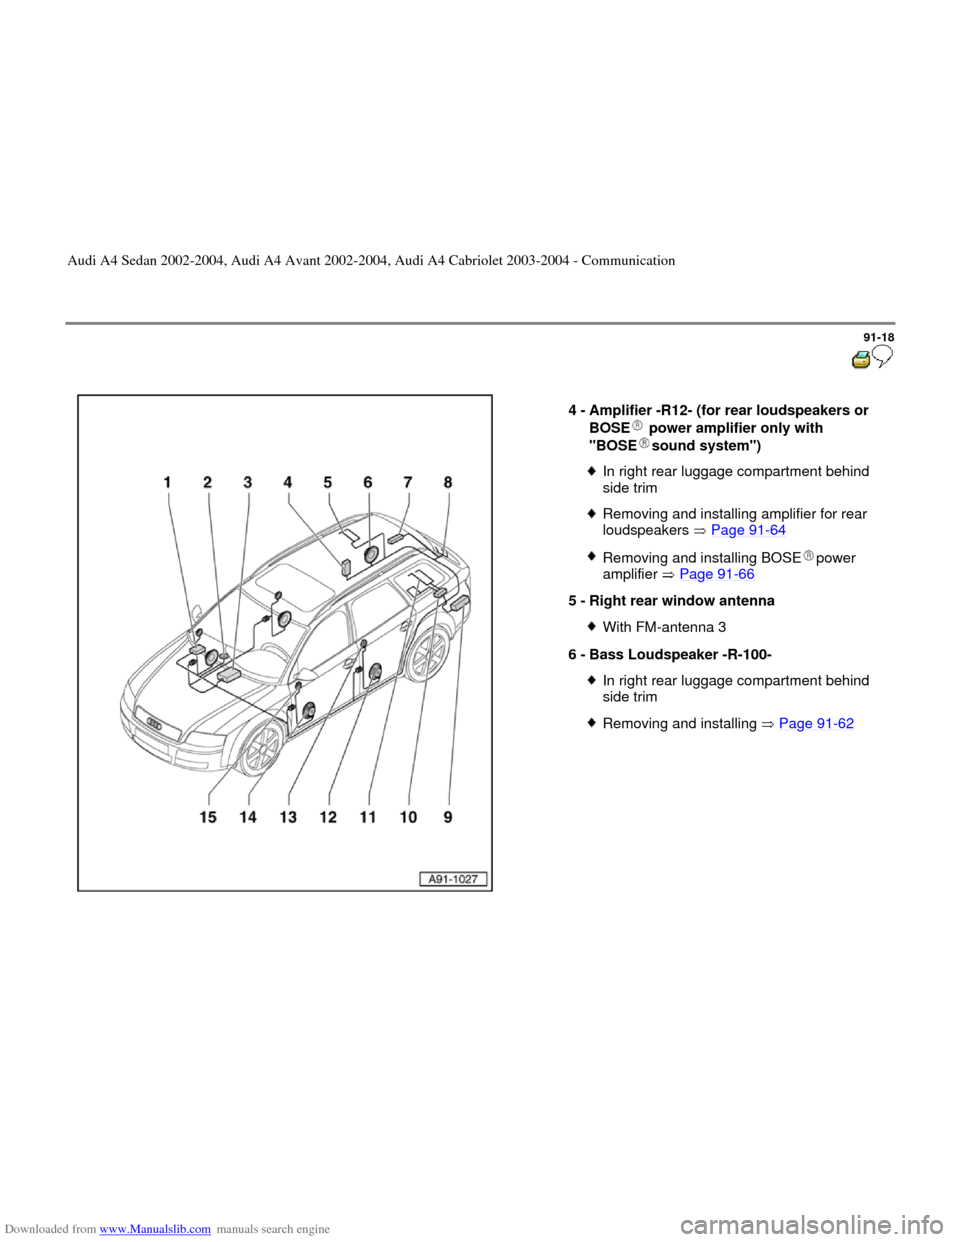 AUDI A4 2002 B5 / 1.G Radio System General Information Downloaded from www.Manualslib.com manuals search engine 91-18
 
  
4 - 
Amplifier -R12- (for rear loudspeakers or 
BOSE  power amplifier only with 
"BOSE sound system") 
In right rear luggage compart